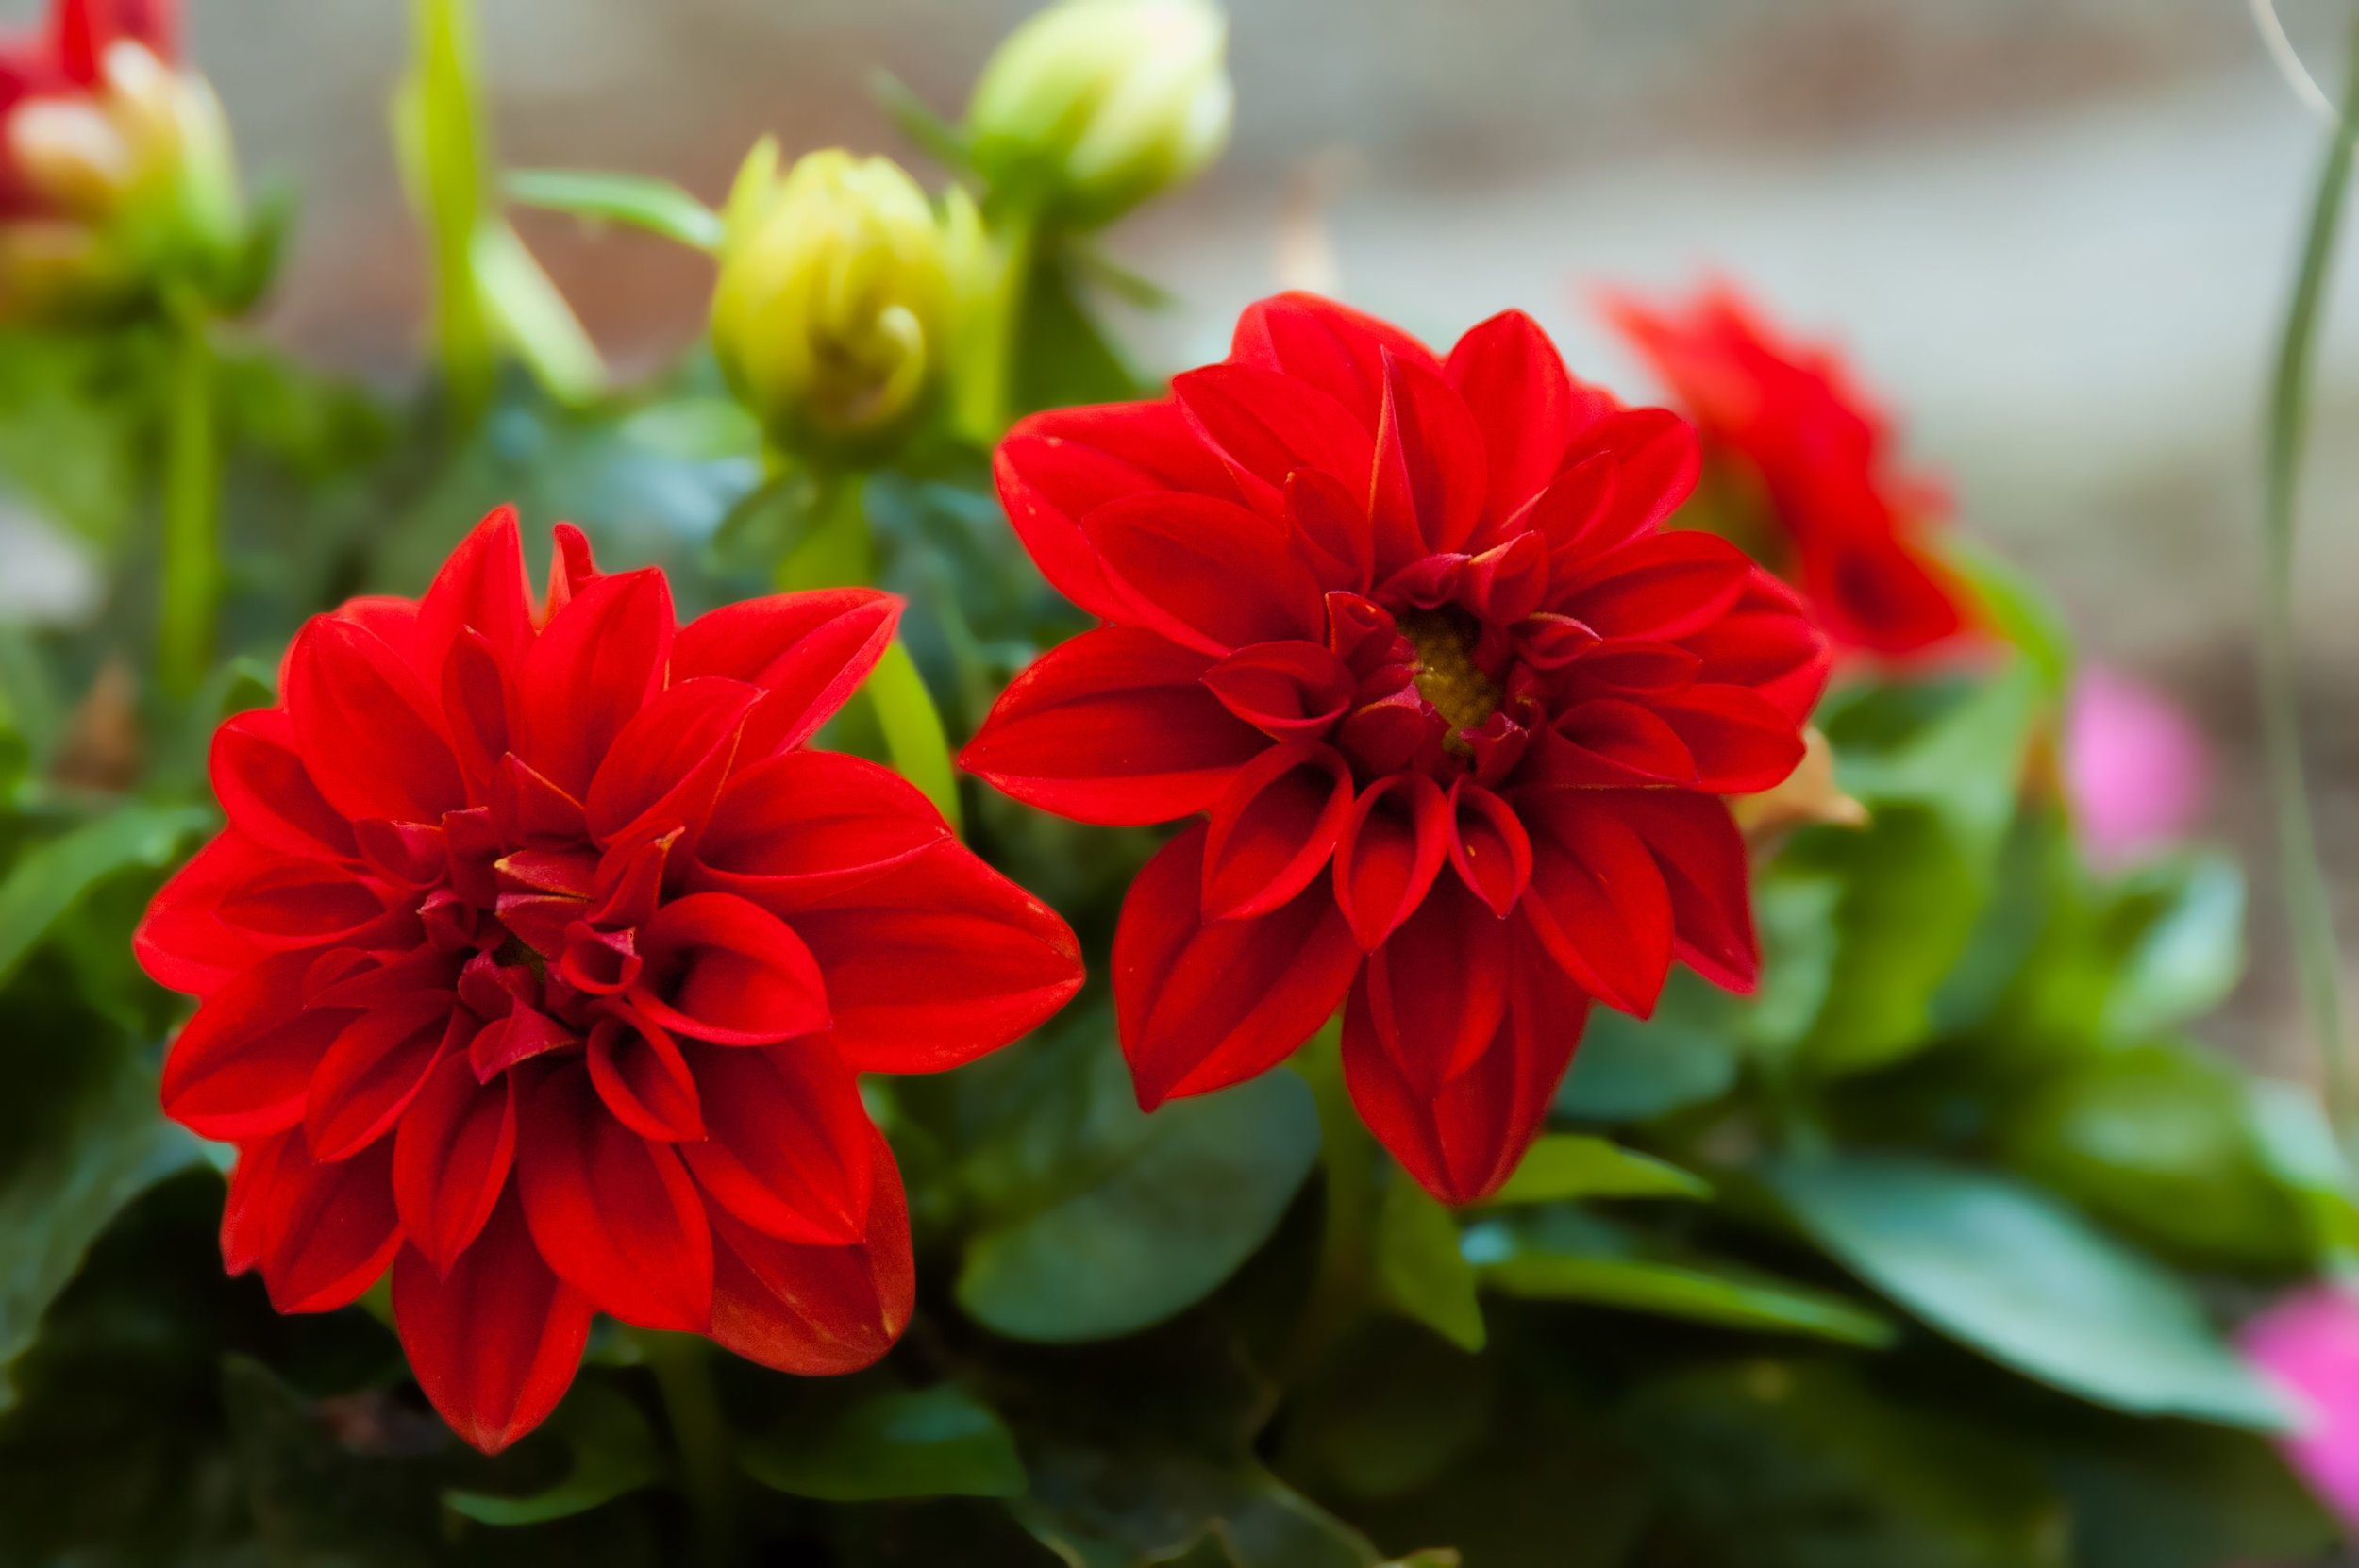  source:https://hips.hearstapps.com/hmg-prod.s3.amazonaws.com/images/close-up-of-red-flowers-royalty-free-image-678895095-1546362083.jpg   